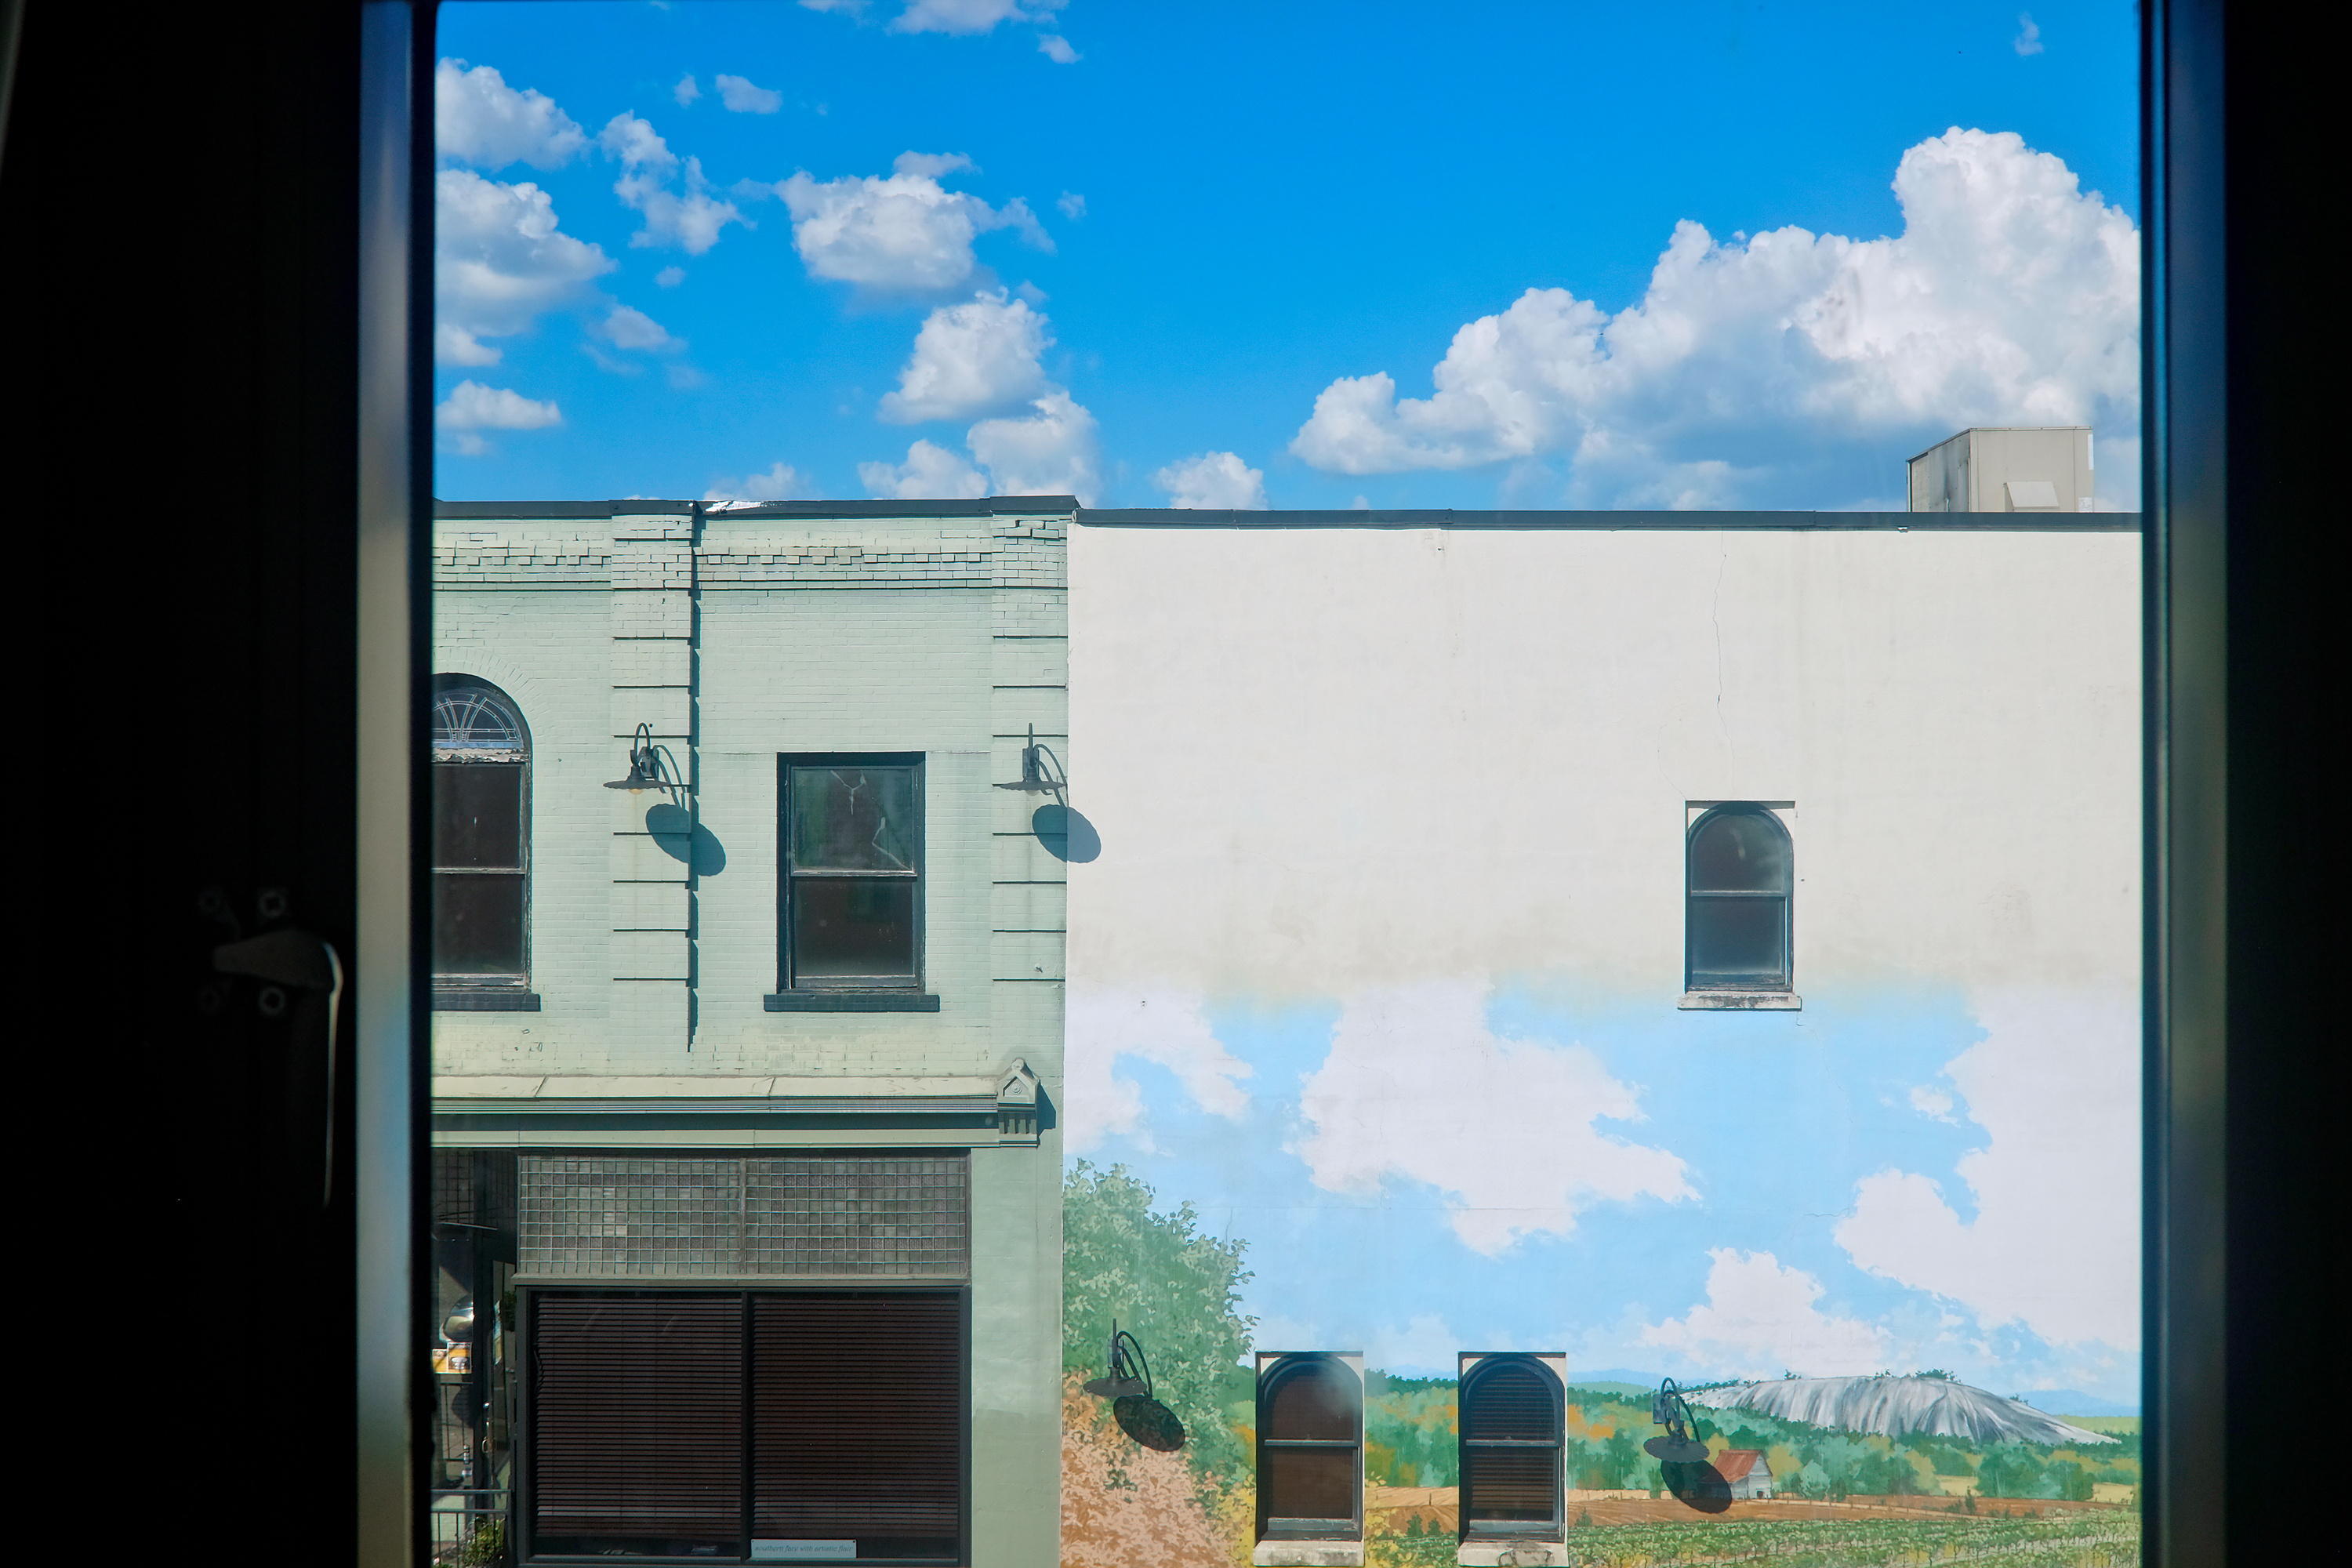 View from the hotel window of a mural in Elkin